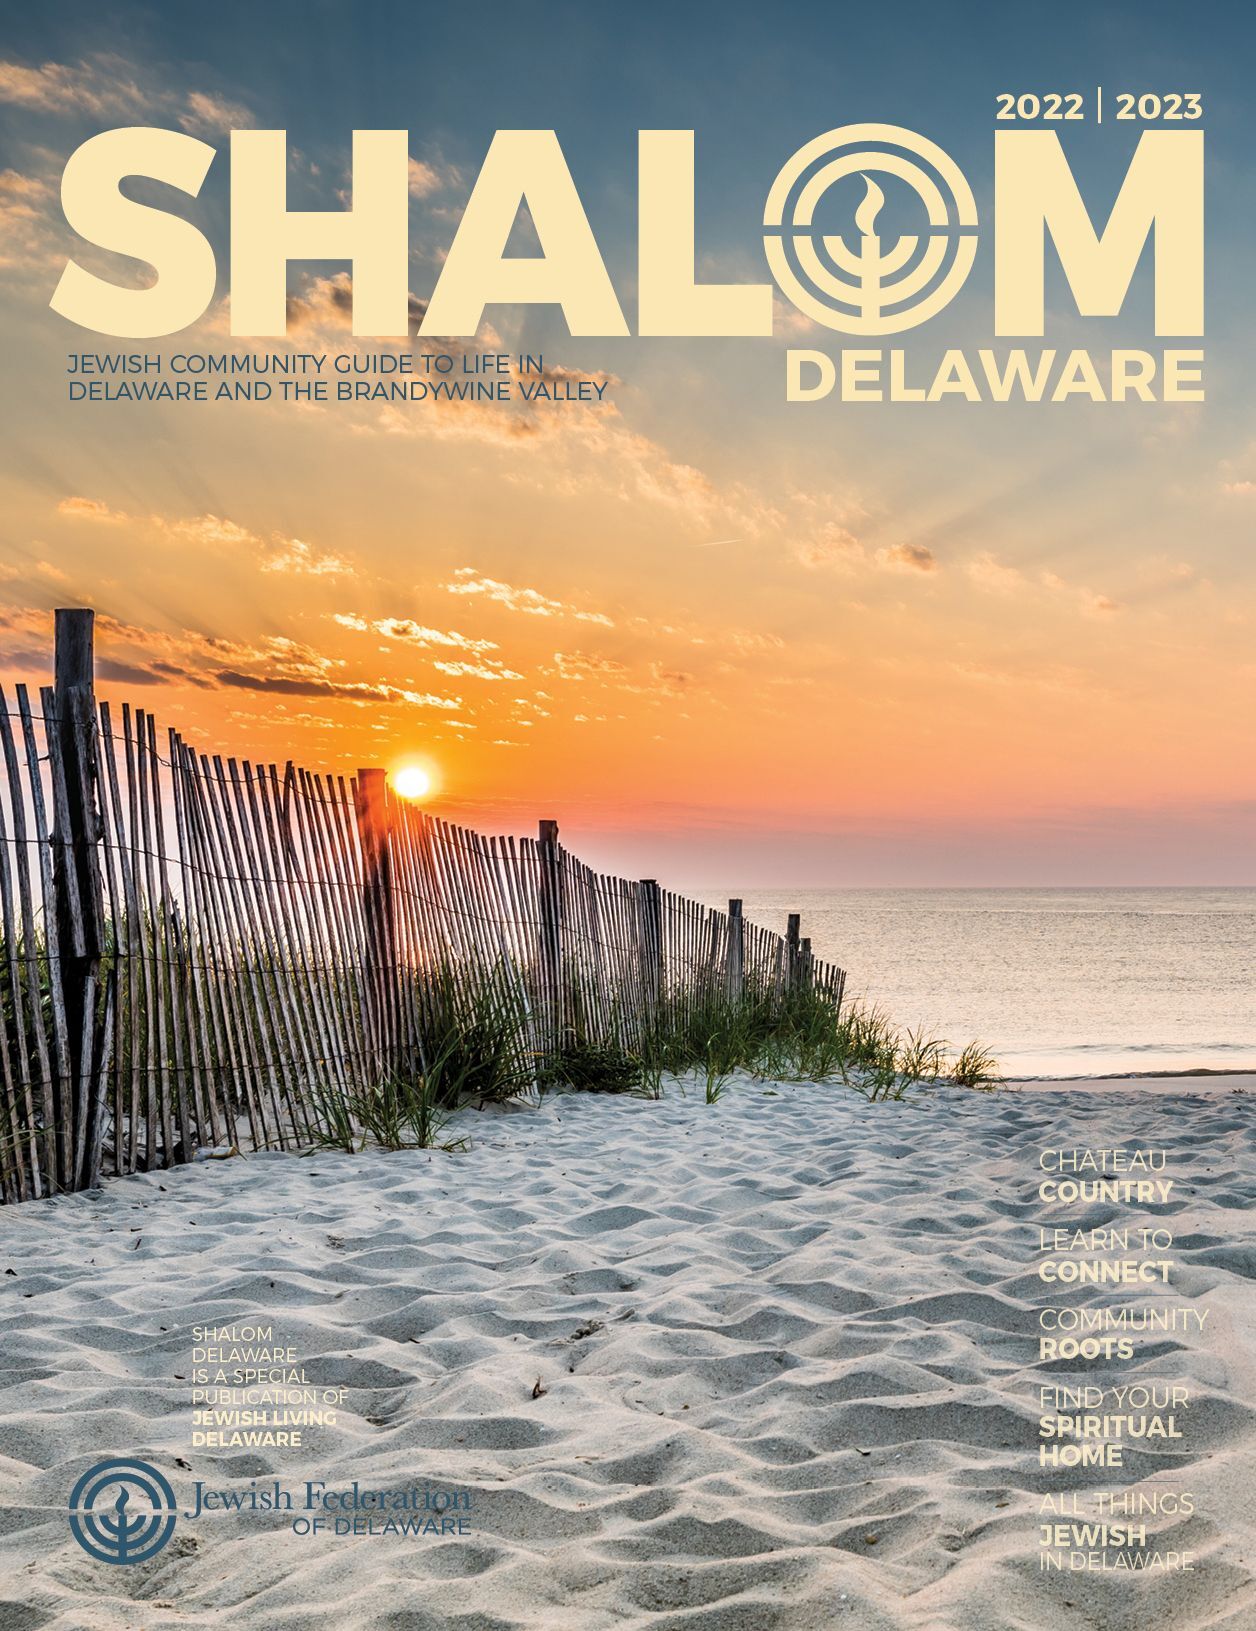 2022-2023 edition of SHALOM Delaware